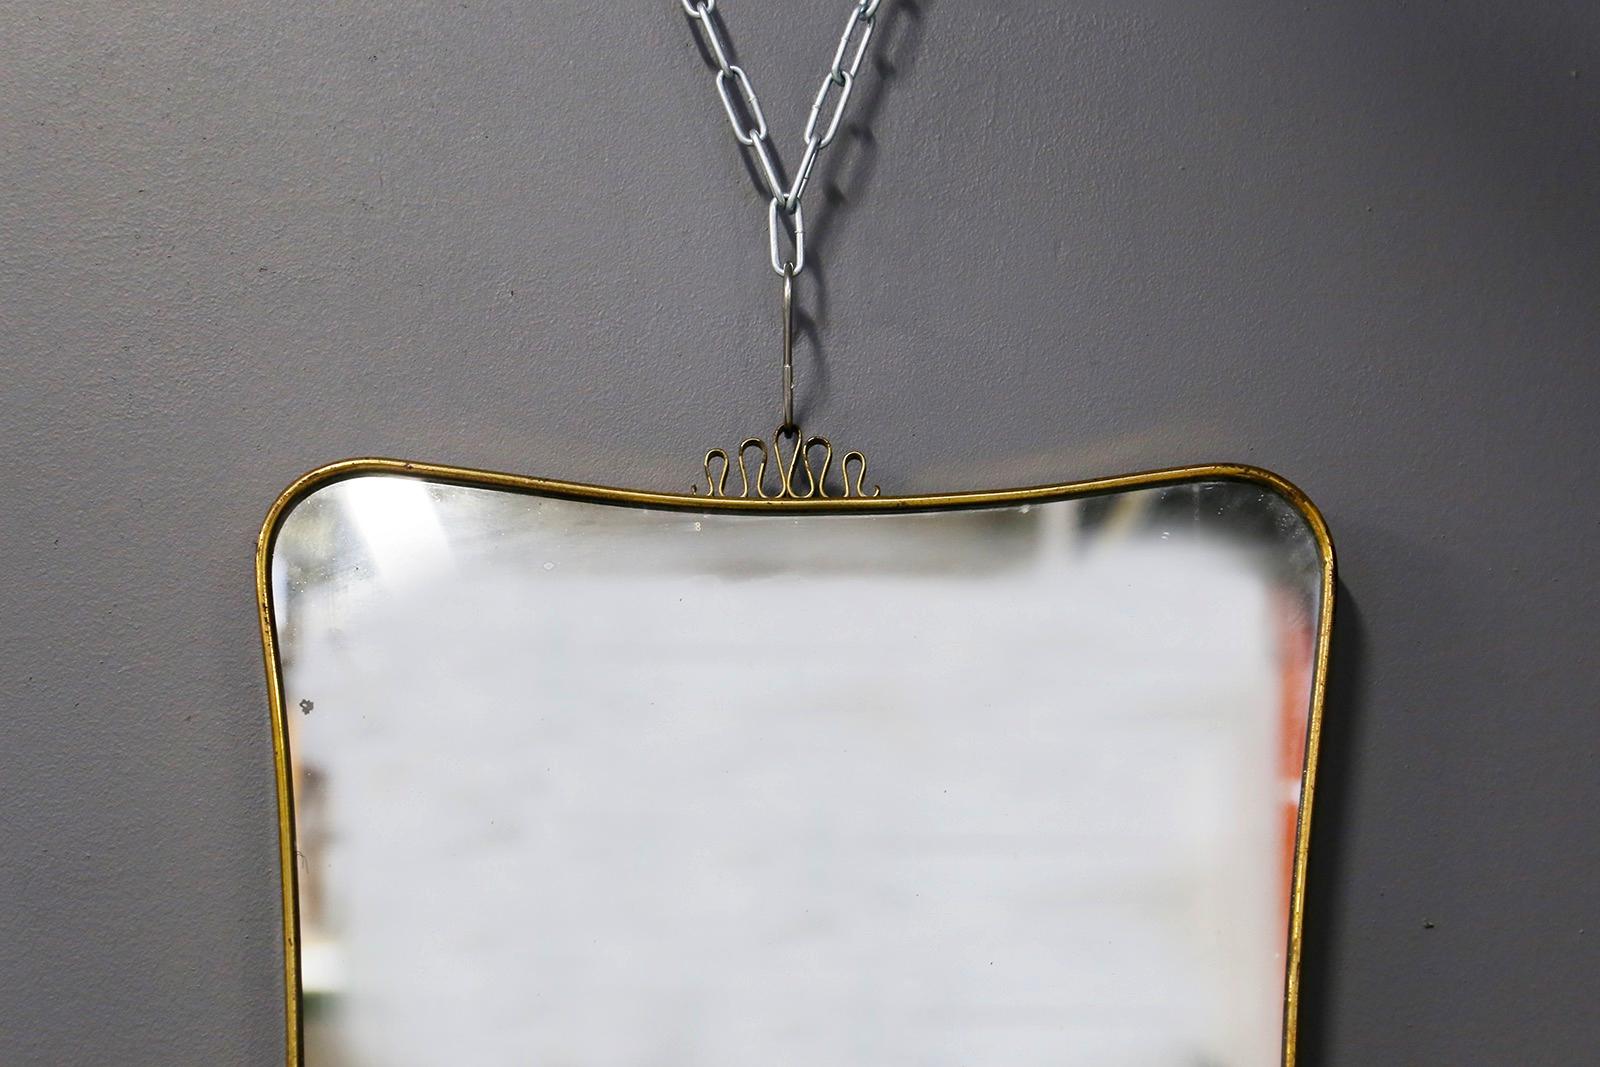 Elegant Italian wall mirror from the 1950s attributed to Gio Ponti.
The mirror is made of curved brass with slight wear due to age and use. In the upper part there is an ornamental element in curved brass, this decorative element is also found in